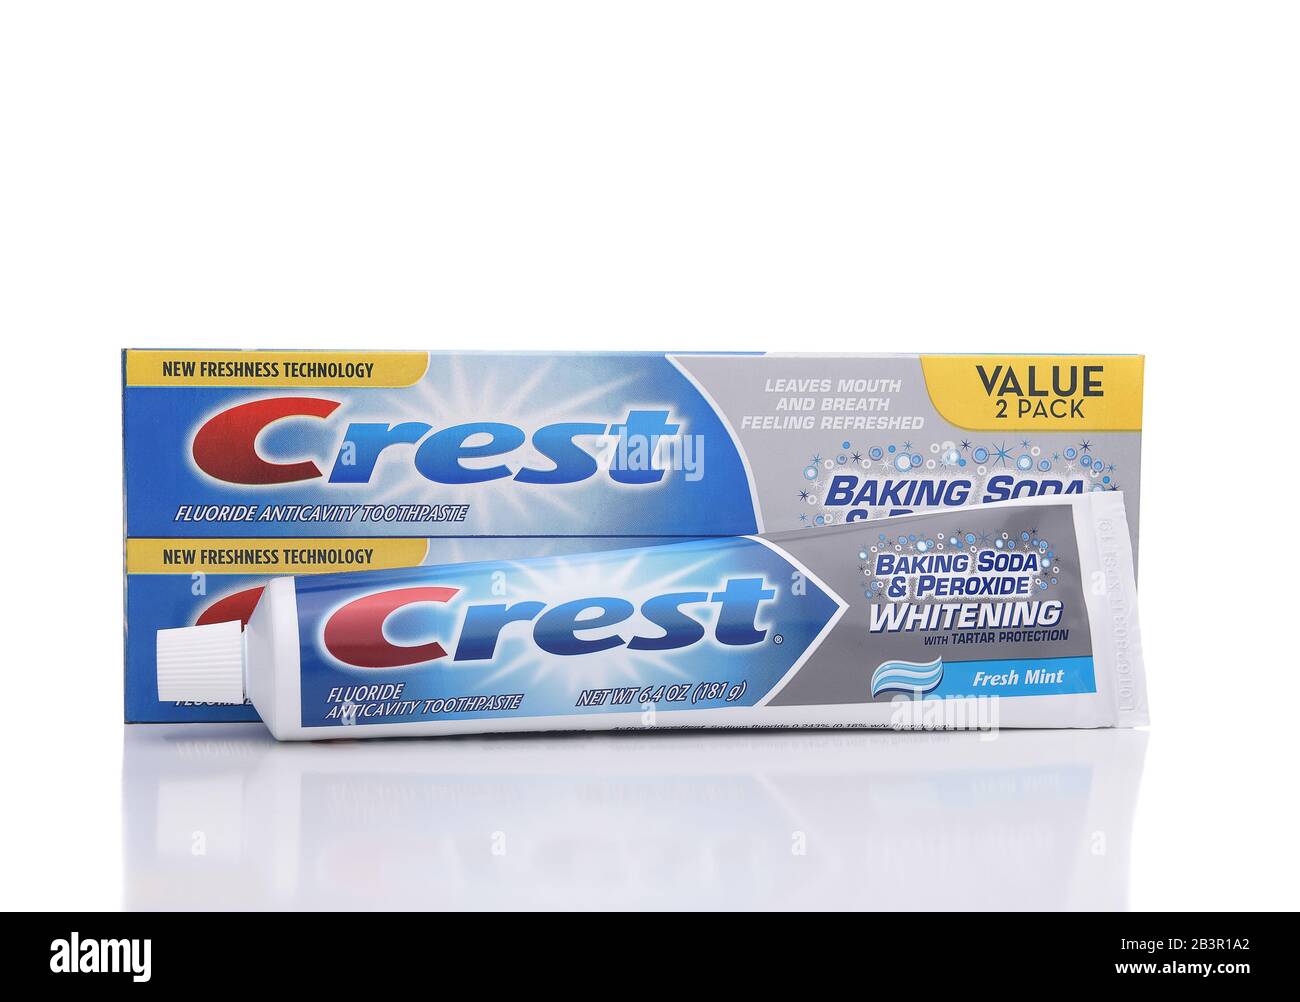 werkelijk Permanent Ontwikkelen IRVINE, CALIFORNIA - JANUARY 22, 2017: Crest Whitening Toothpaste. Crest  from Proctor and Gamble is a leading manufacturer of oral hygiene products  Stock Photo - Alamy